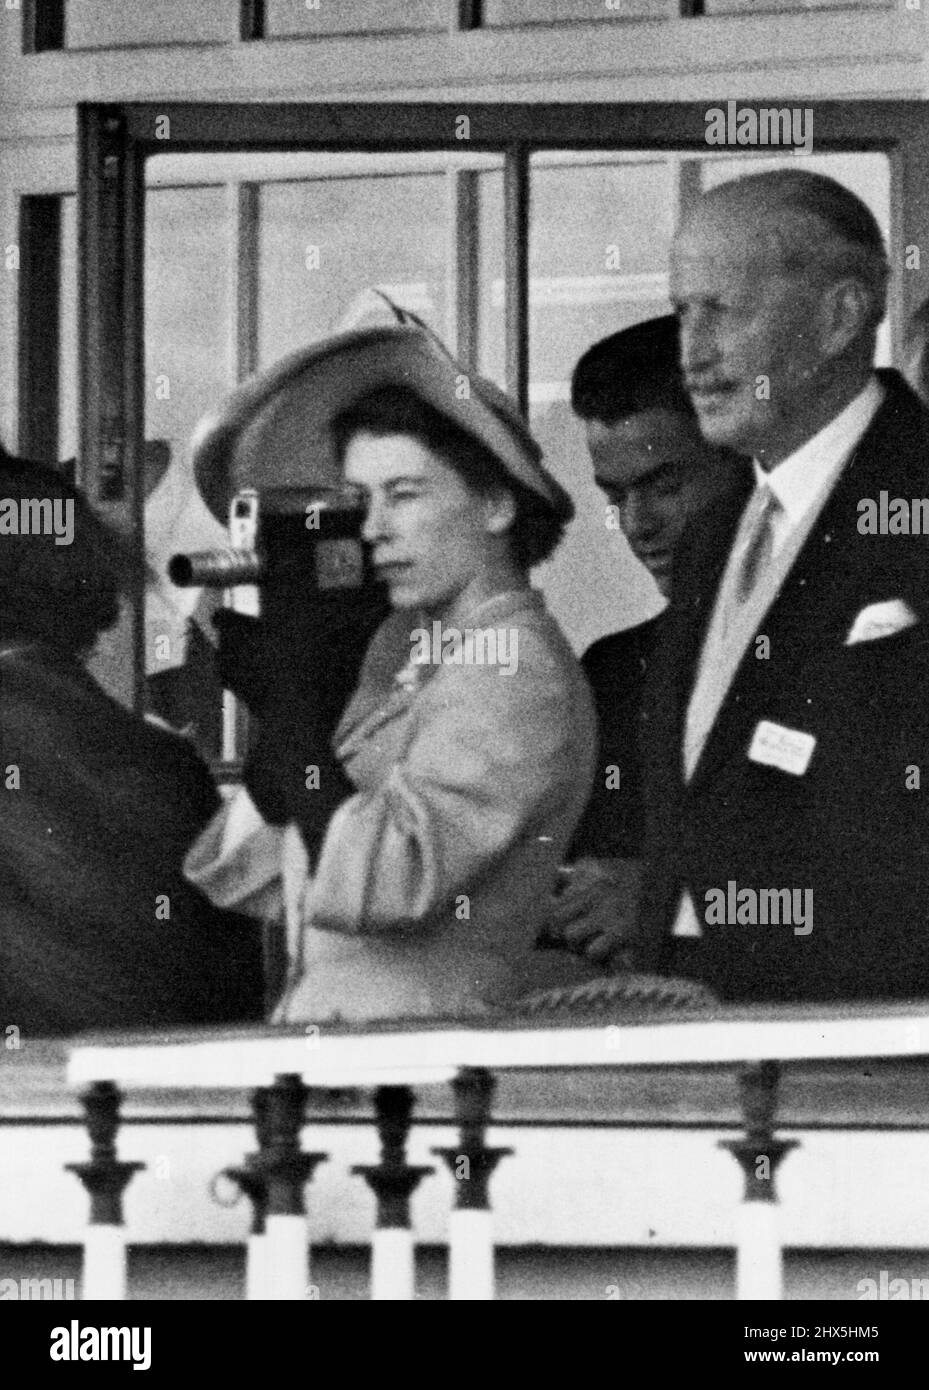 Princess Elizabeth Films The Ascot Gold Cup -- Princess Elizabeth taking pictures of the Ascot Gold Cup with her cine camera. June 14, 1951. (Photo by Fox Photos). Stock Photo